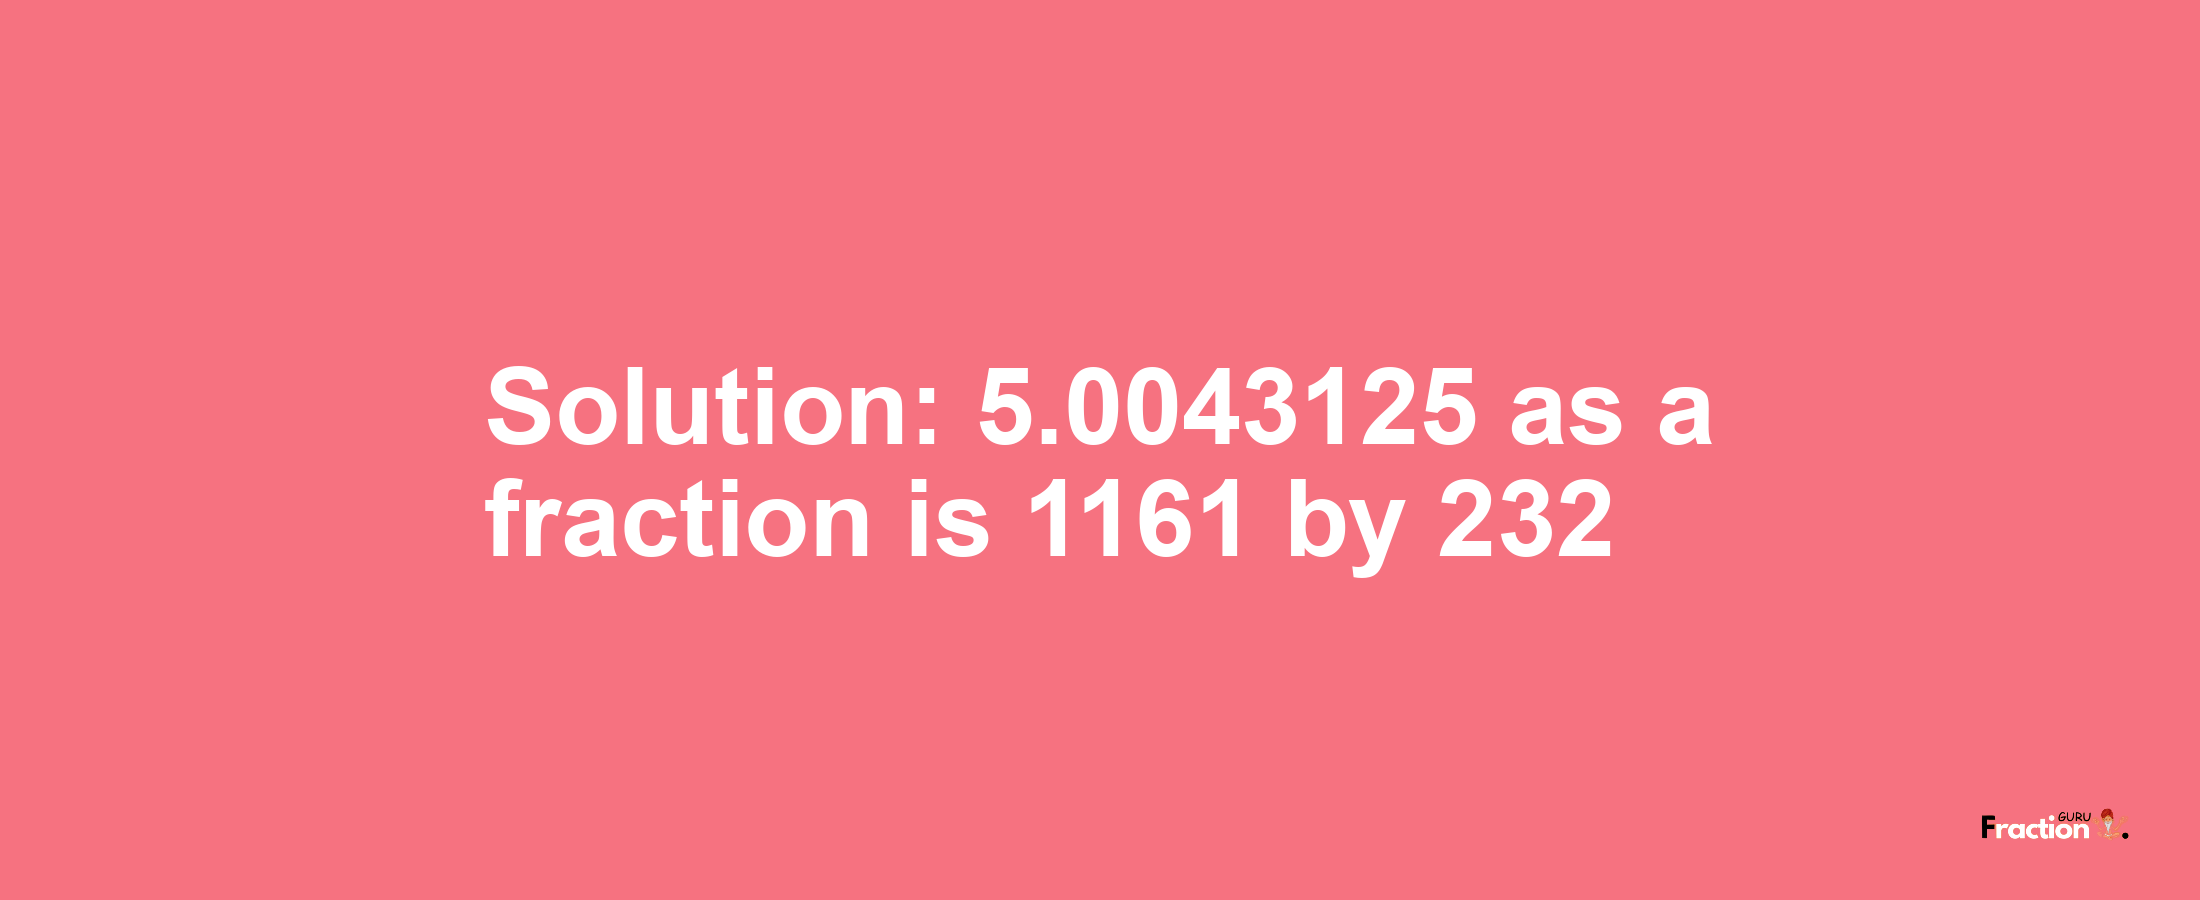 Solution:5.0043125 as a fraction is 1161/232